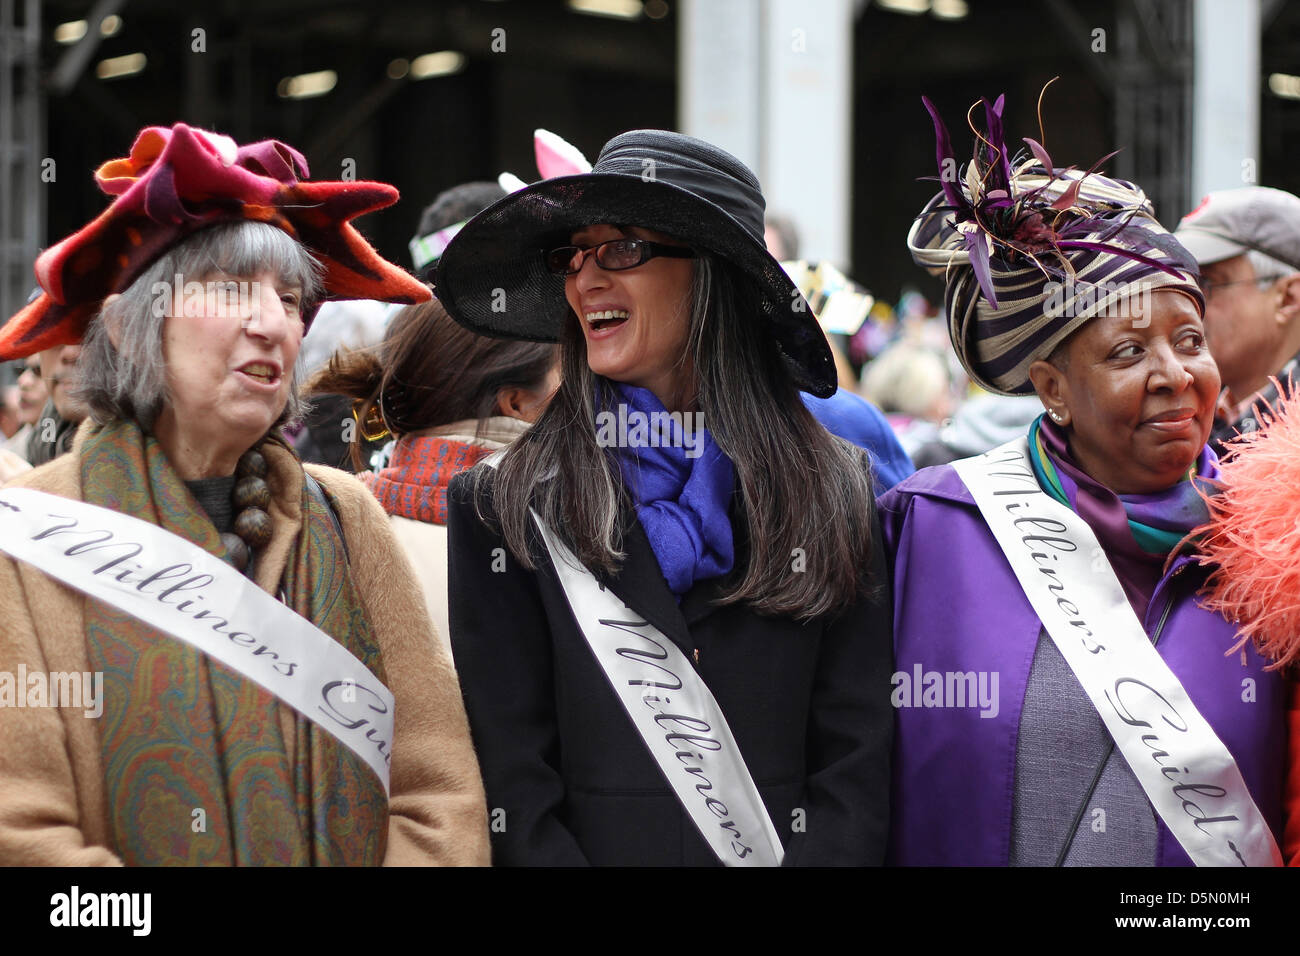 Women wearing Milliners Guild sashes at New York City's Easter Parade Stock Photo